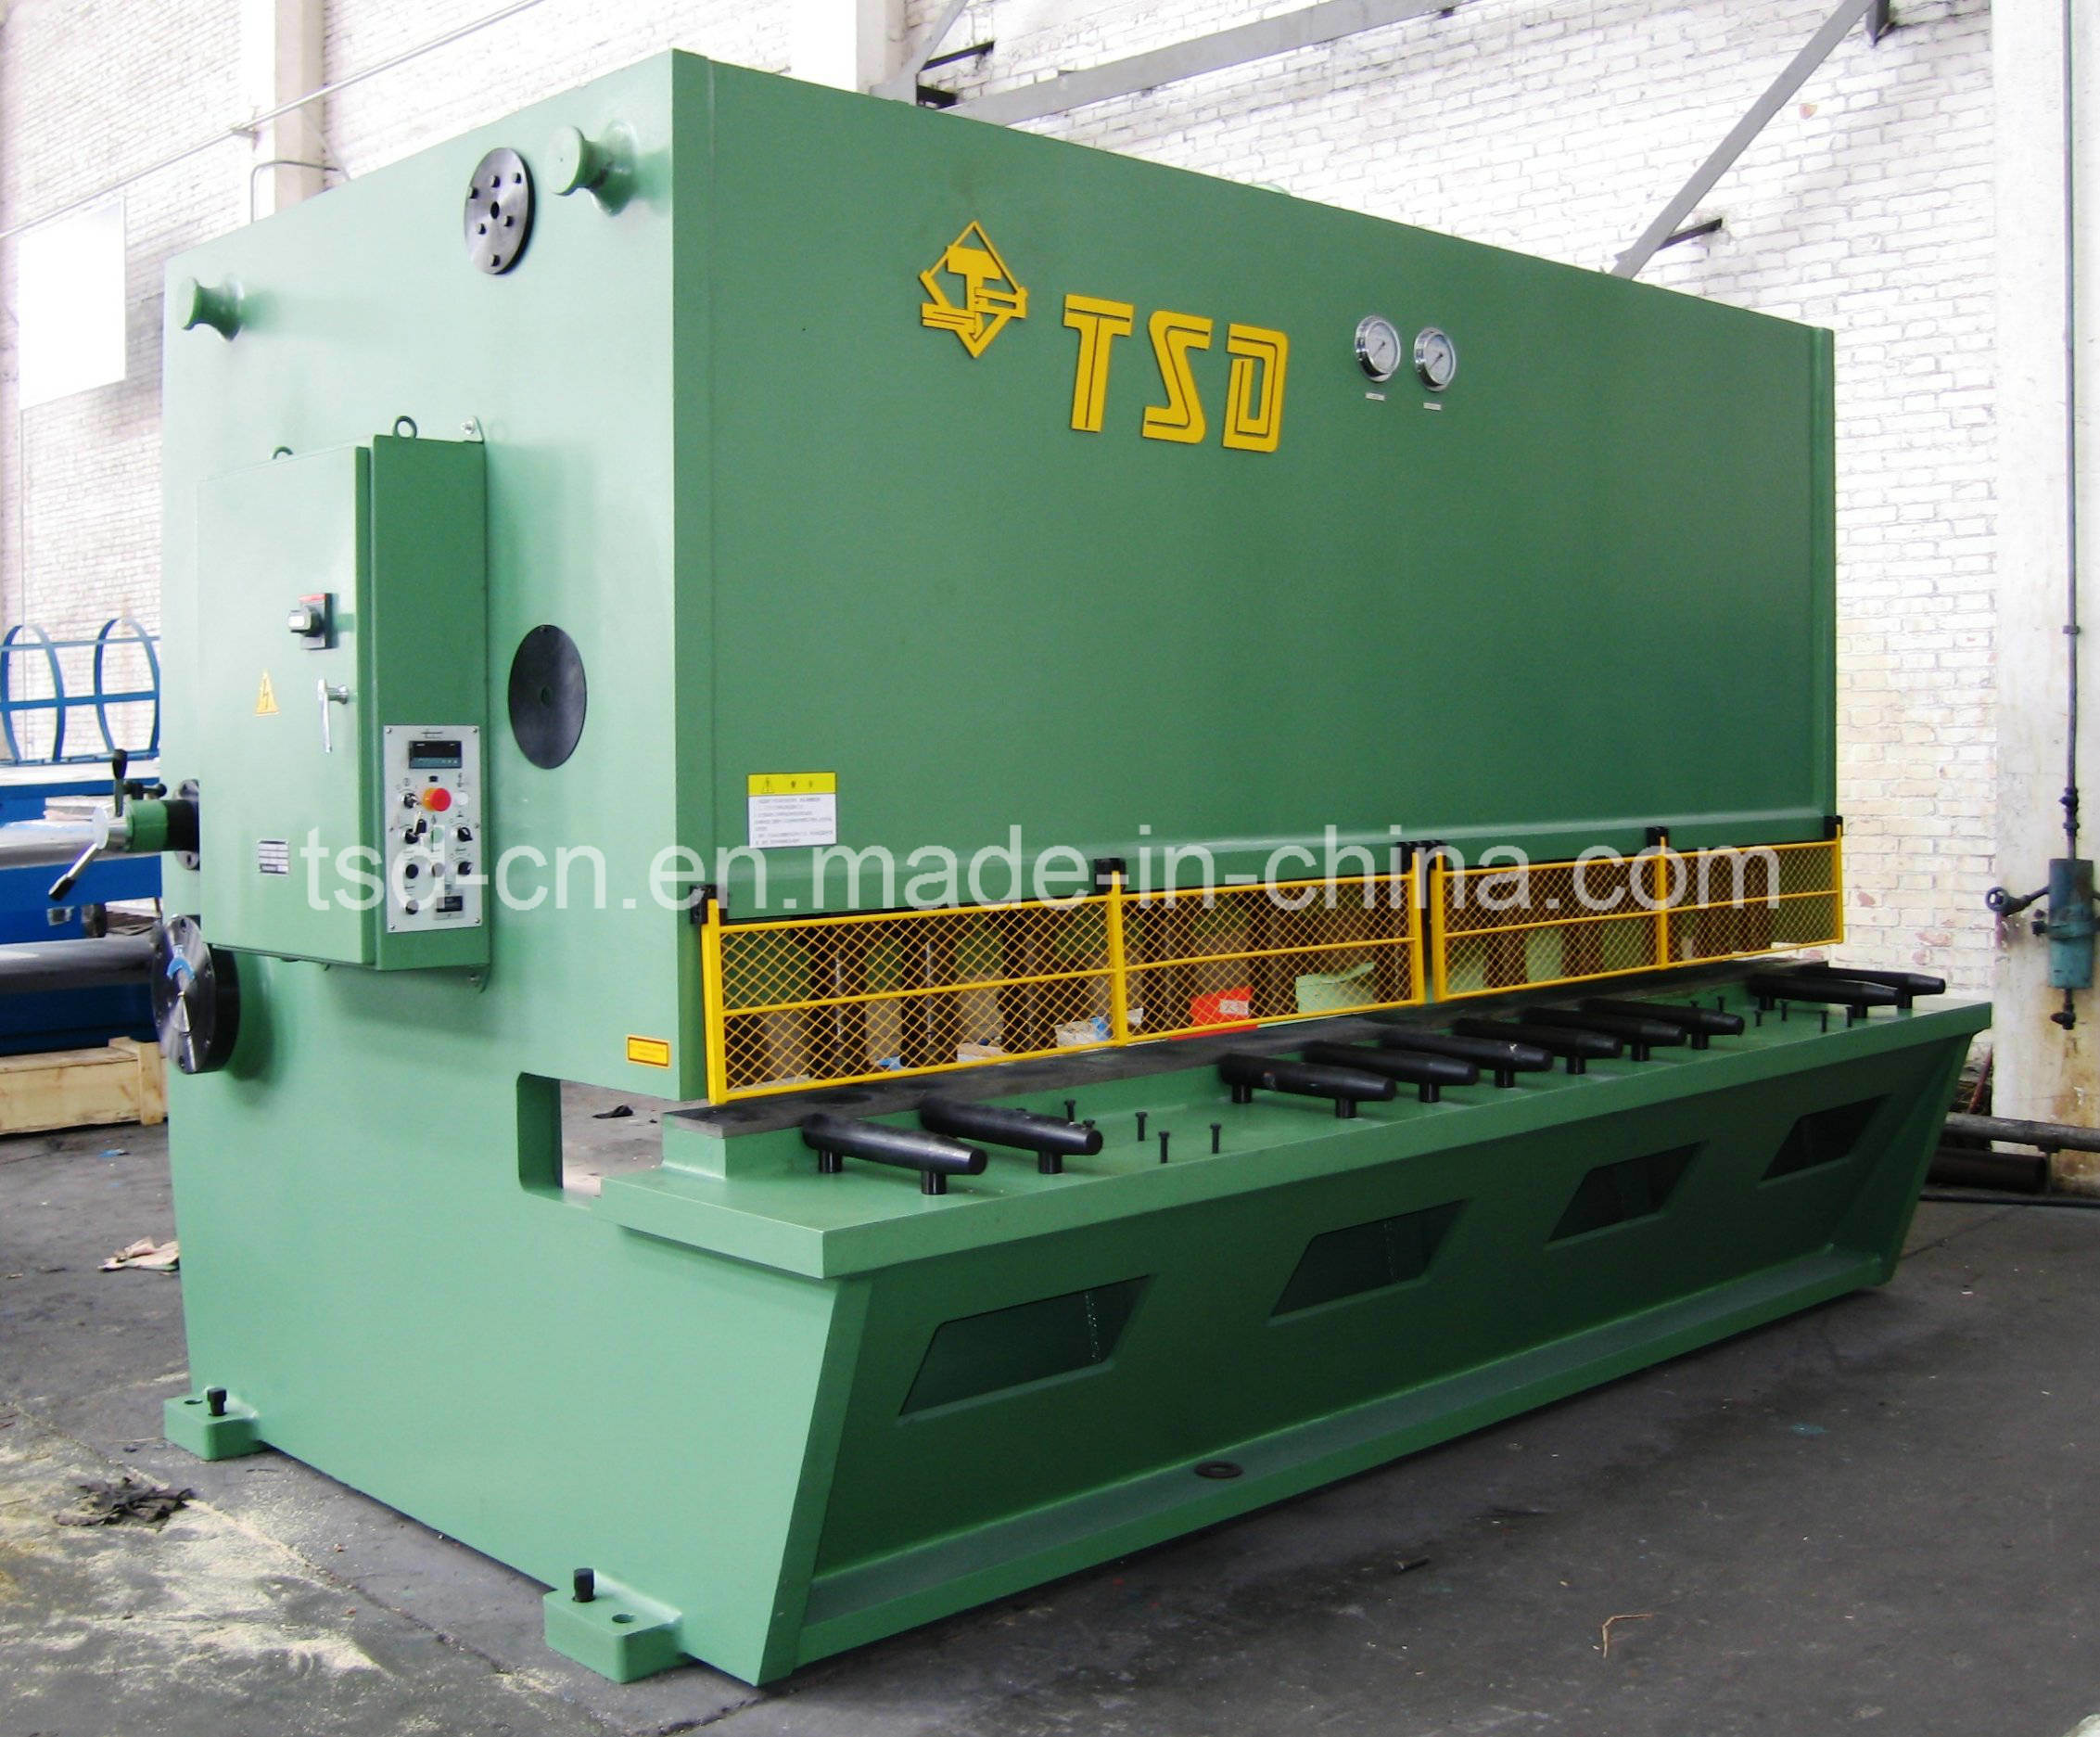 Hydraulic Shearing Machine Used to Shear Thick Steel Plate (QC12Y-32*3200)